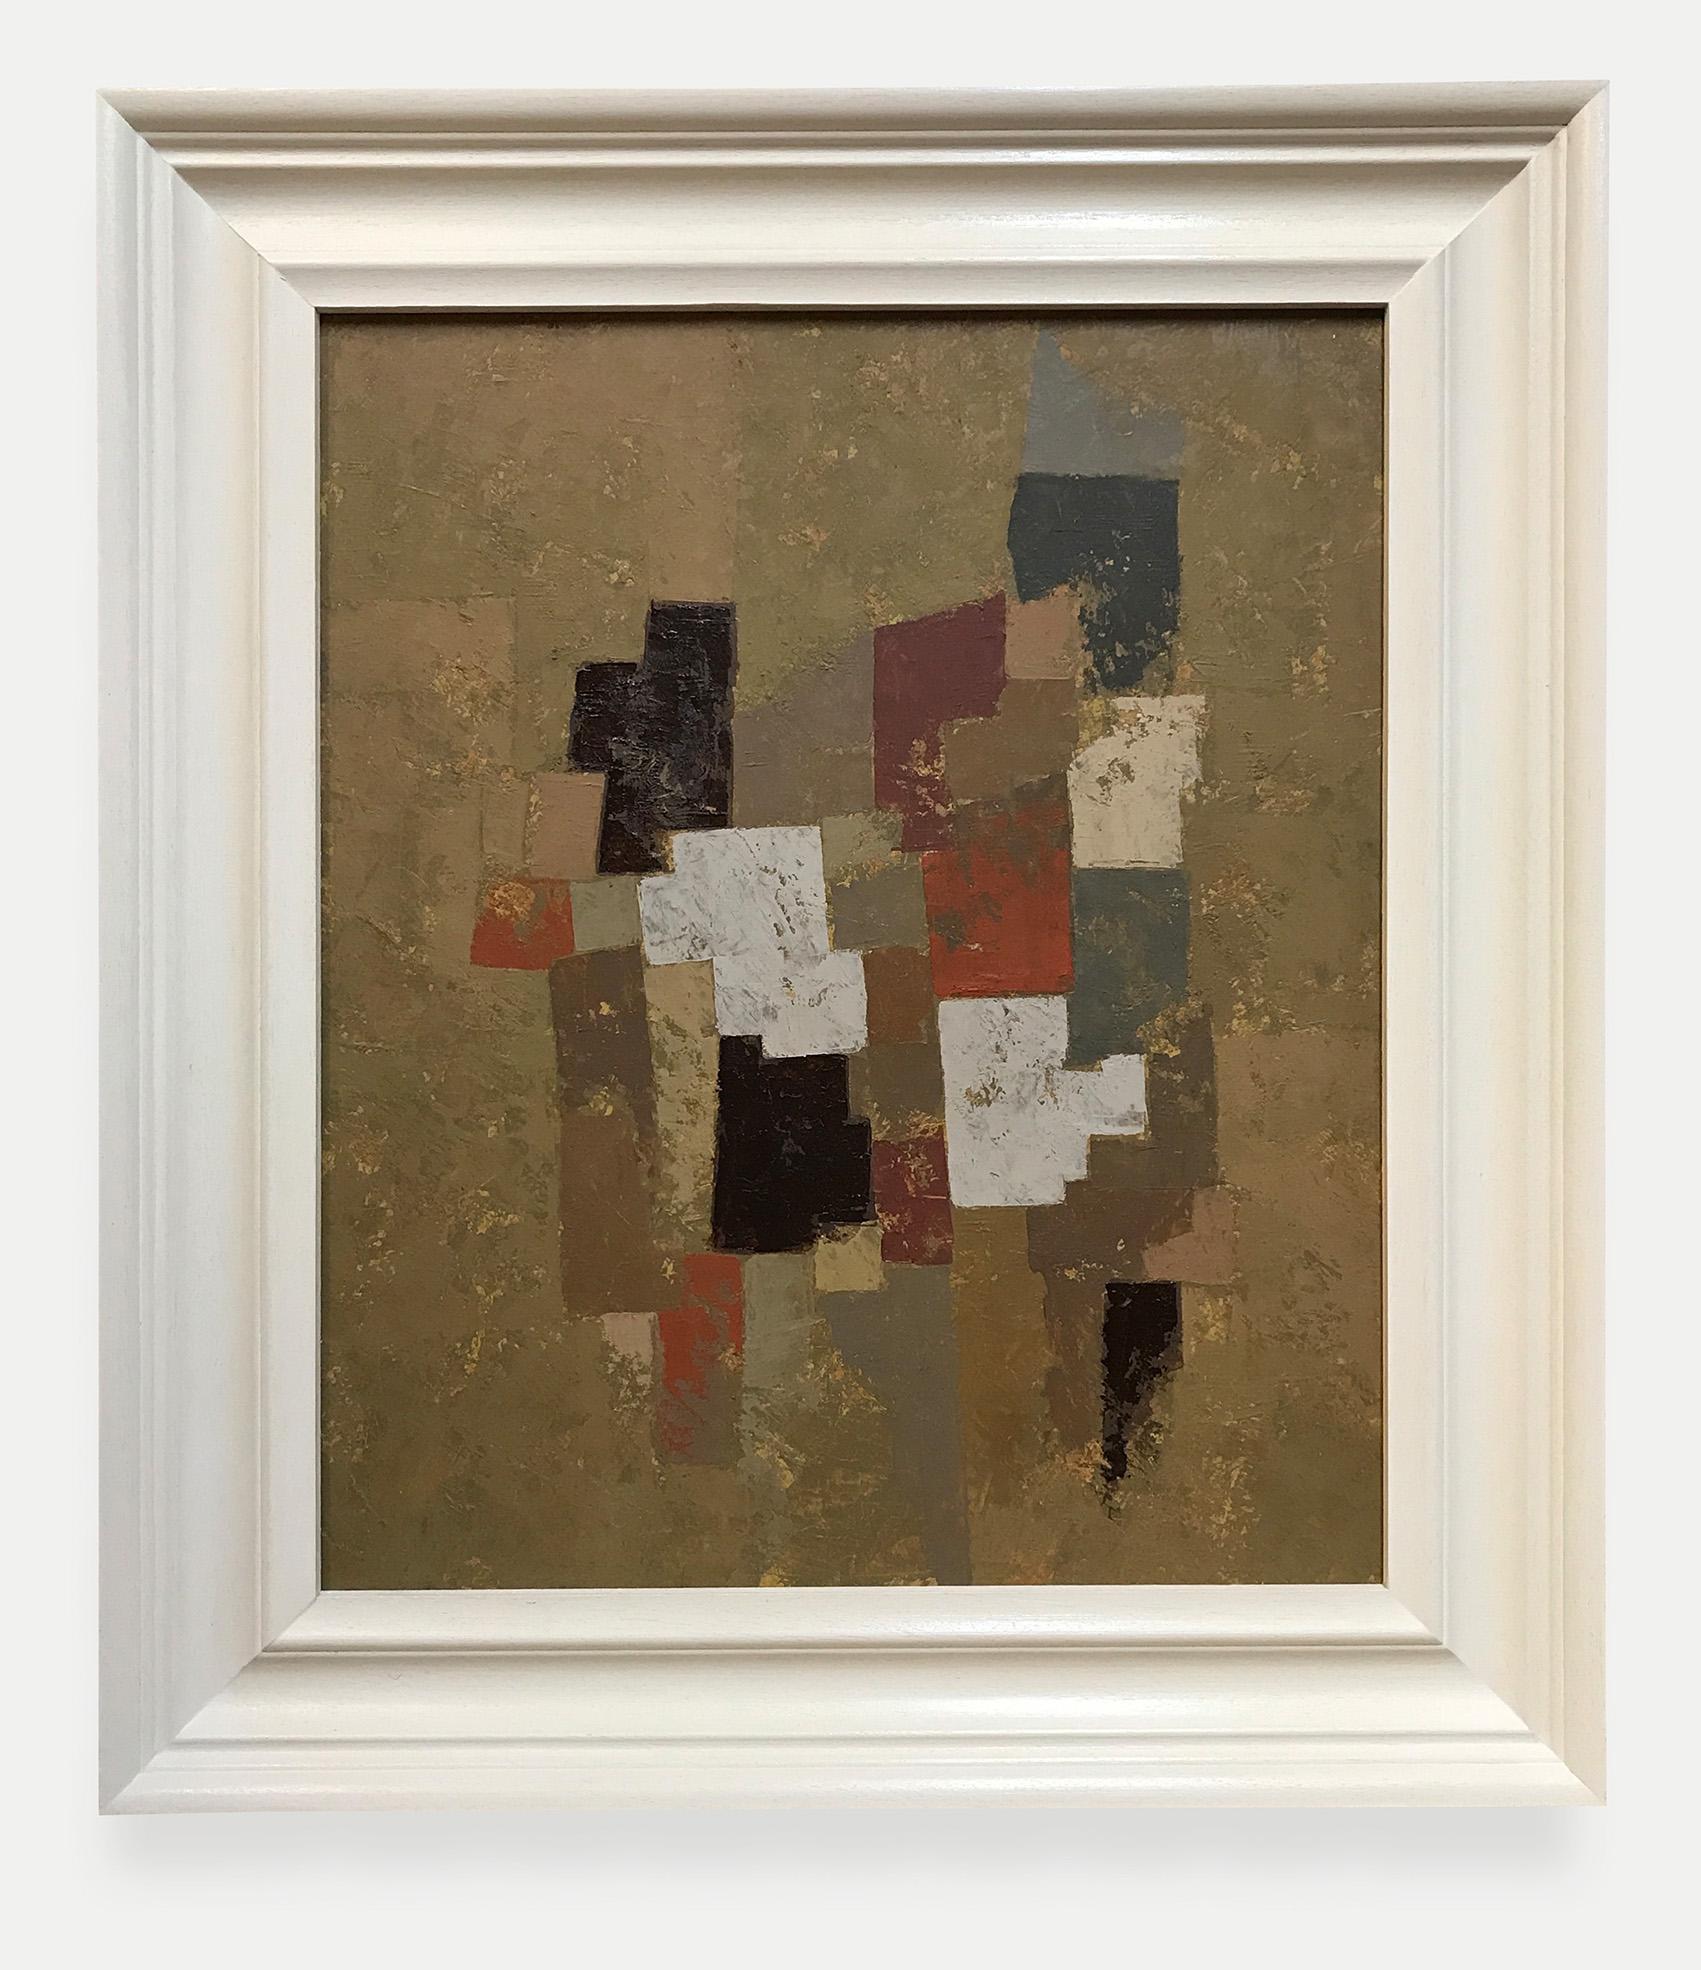 ‘Bakai 1’ has been painted on canvas, laid to board and mounted into a hand-painted frame.  It is one of a pair, with Bakai 2, that can be bought together or separately.  These paintings are rooted in the tradition of British and European post-war